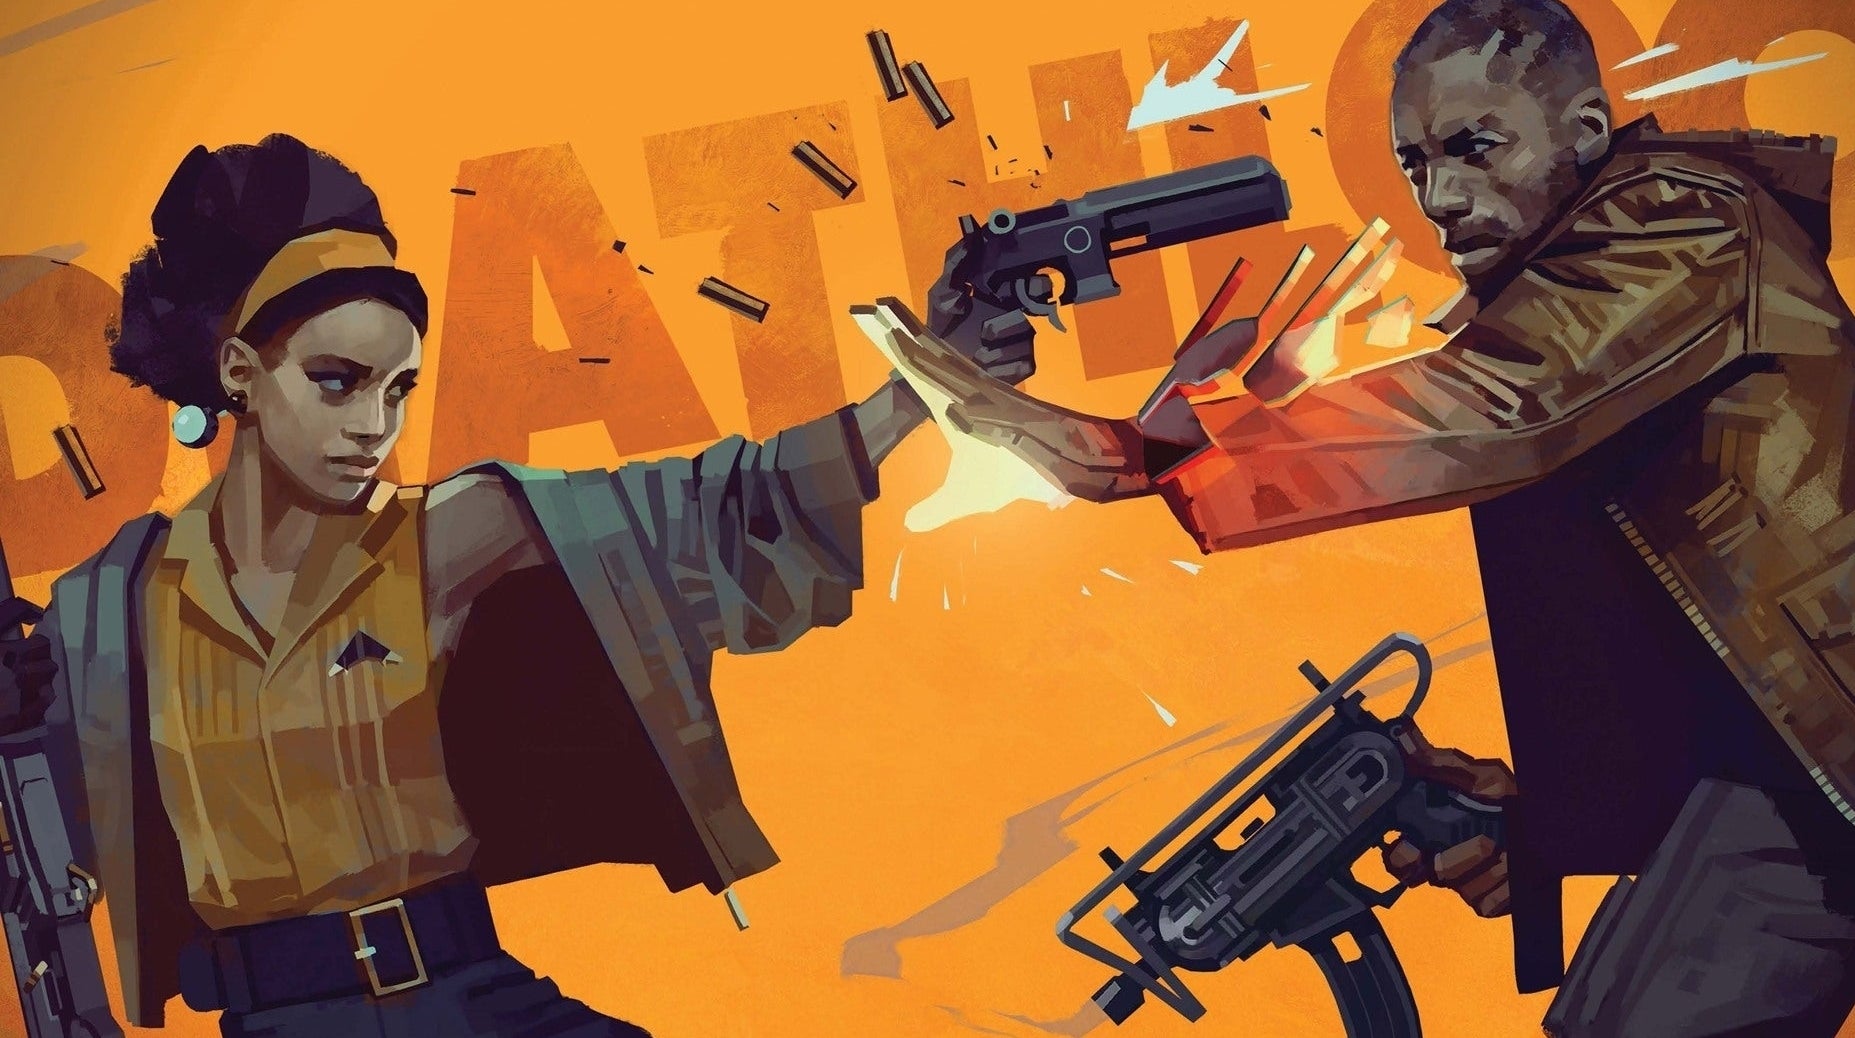 Image for Deathloop looks like more than Dishonored with guns - it's Arkane does Hitman